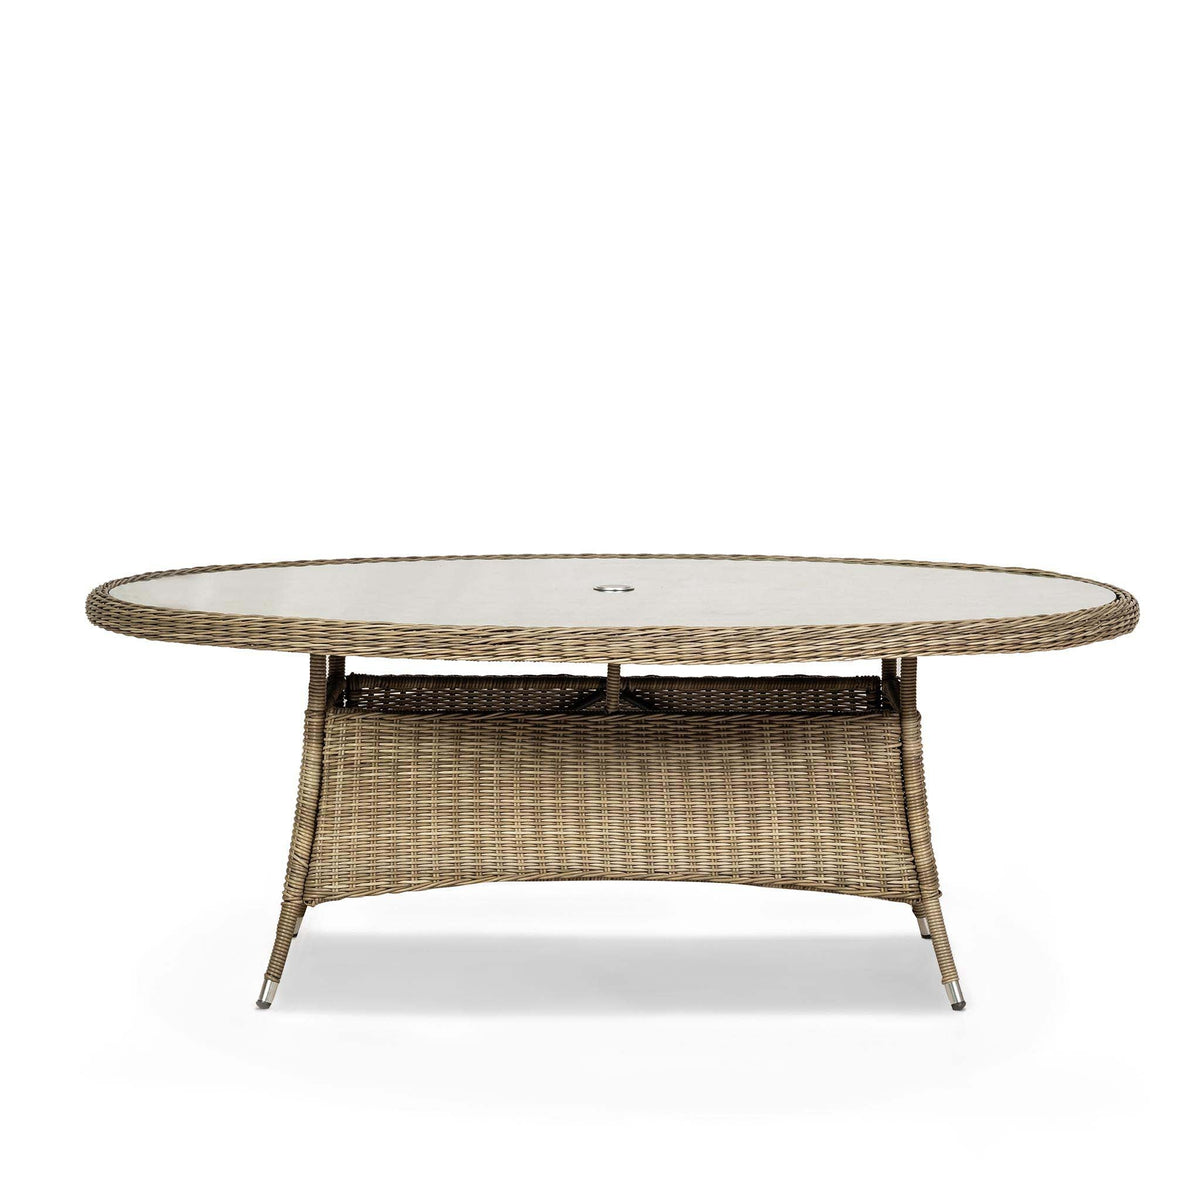 Wentworth 6 Seat Ellipse High-back Rattan Dining Set - Front view of Table